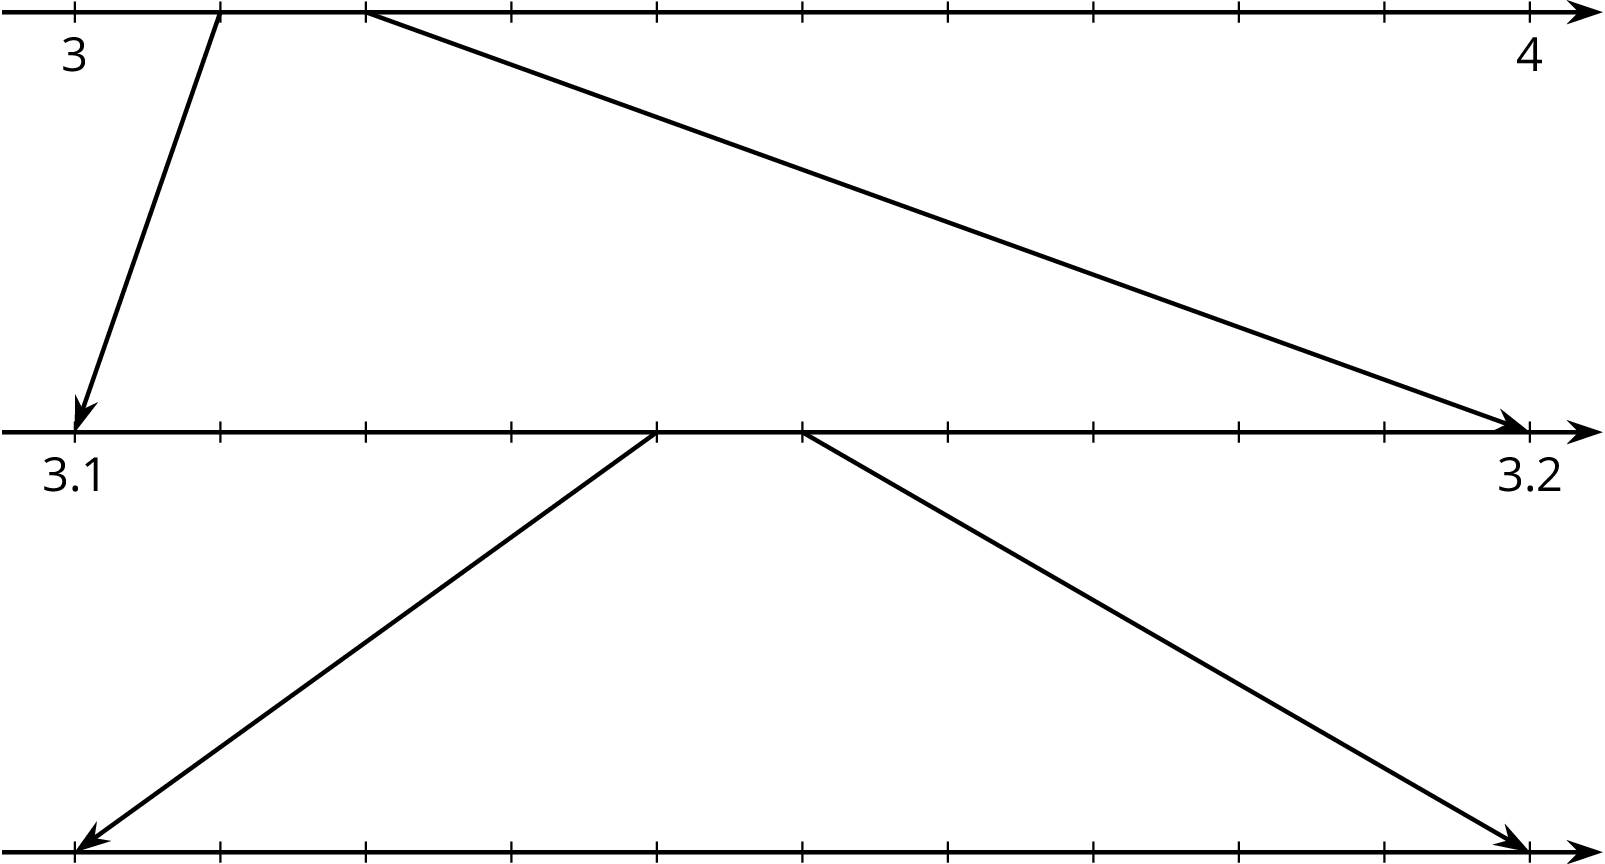 A zooming number line consisting of 3 number lines, aligned vertically, each with 11 evenly spaced tick marks. On the top number line, the first tick mark is labeled "3" and the eleventh tick mark is labeled "4." Two arrows are drawn from the top number line to the middle number line. The first arrow is drawn from the second tick mark on the top number line to the first tick mark on the middle number line. The other arrow is drawn from the third tick mark on top number to the eleventh tick mark on the middle number line. On the middle number line, the first tick mark is labeled "3 point 1" and the eleventh tick mark is labeled "3 point 2." Two arrows are drawn from the middle number line to the bottom number line. The first arrow is drawn from the fifth tick mark on the middle number line to the first tick mark on the bottom number line. The other arrow is drawn from the sixth tick mark on the middle number line to the eleventh tick mark on the bottom number line. The bottom number line is not labeled. 